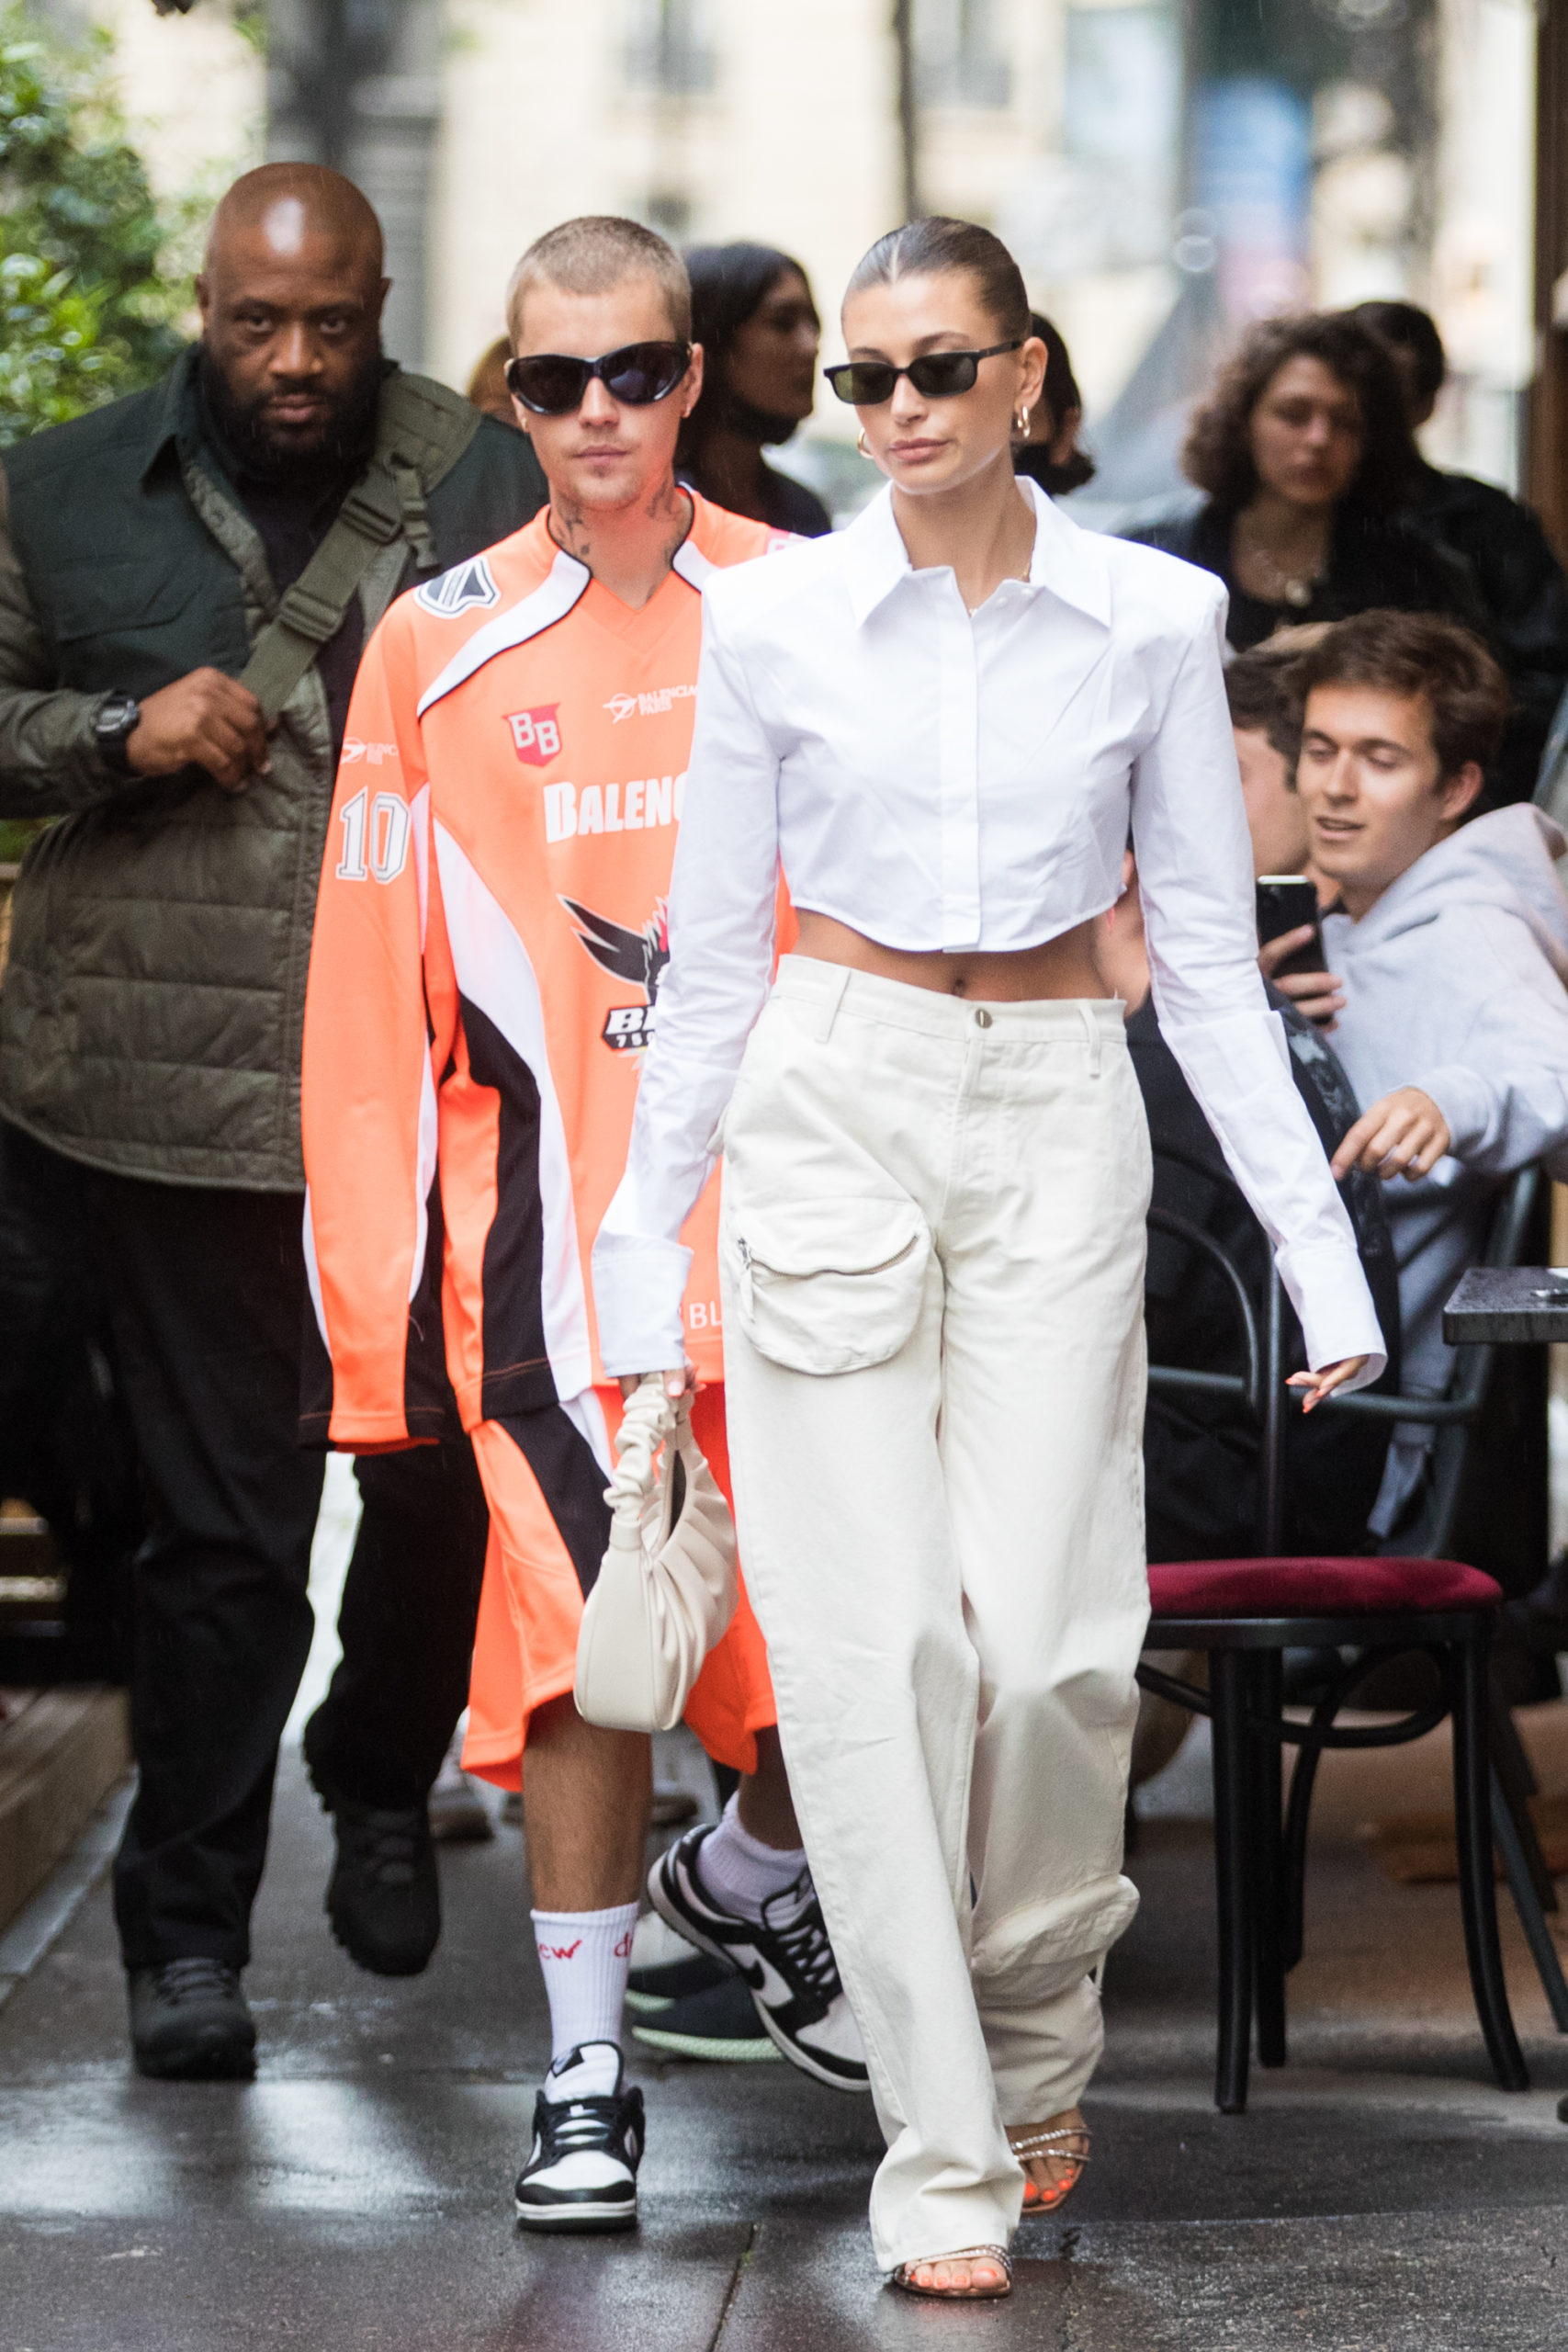 SPOTTED: Justin Bieber in Balenciaga with Hailey Bieber in Paris